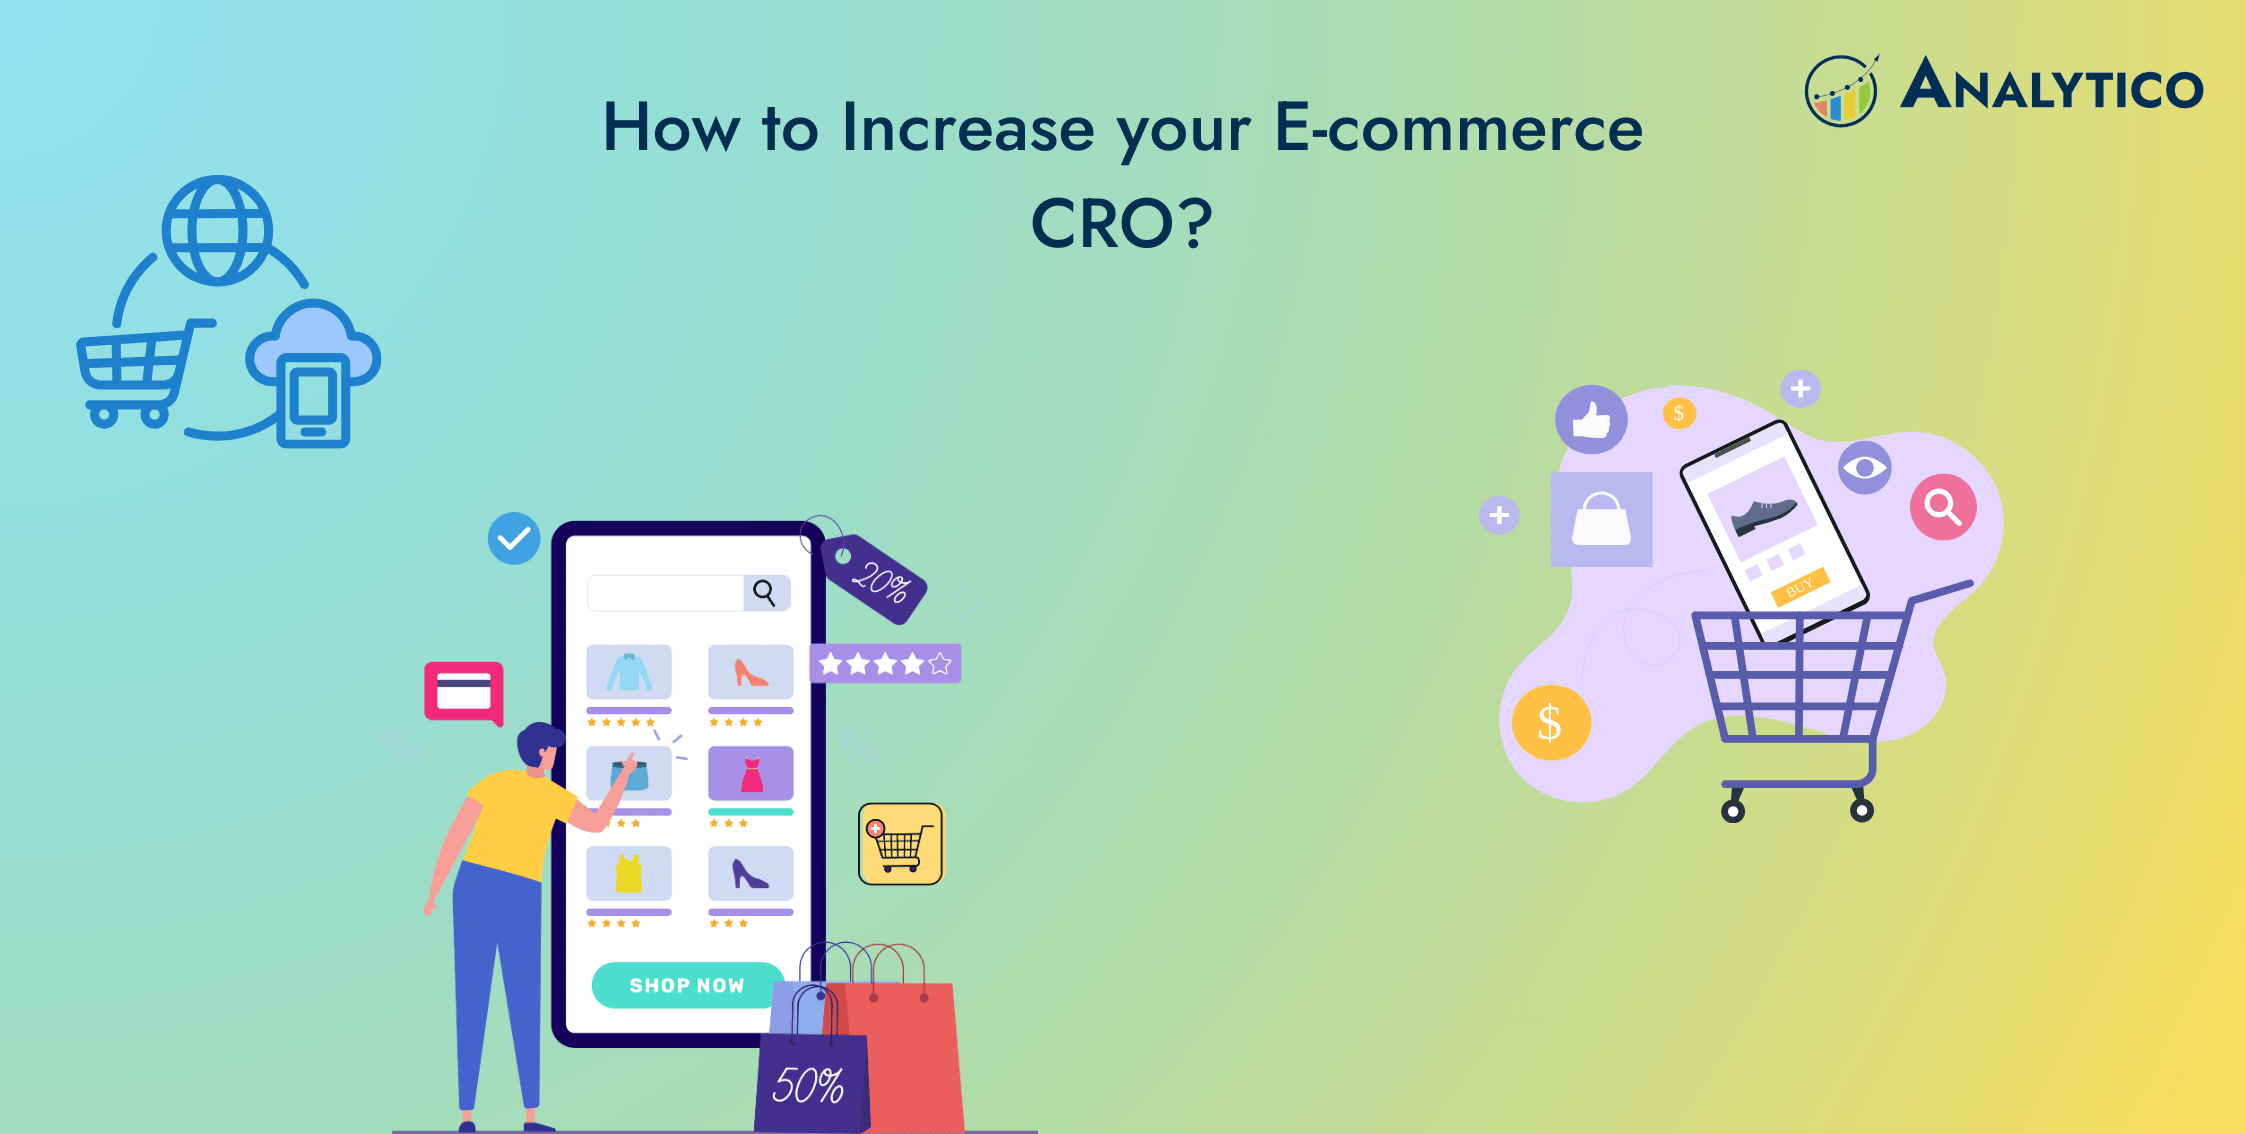 How to Increase your E-commerce CRO?